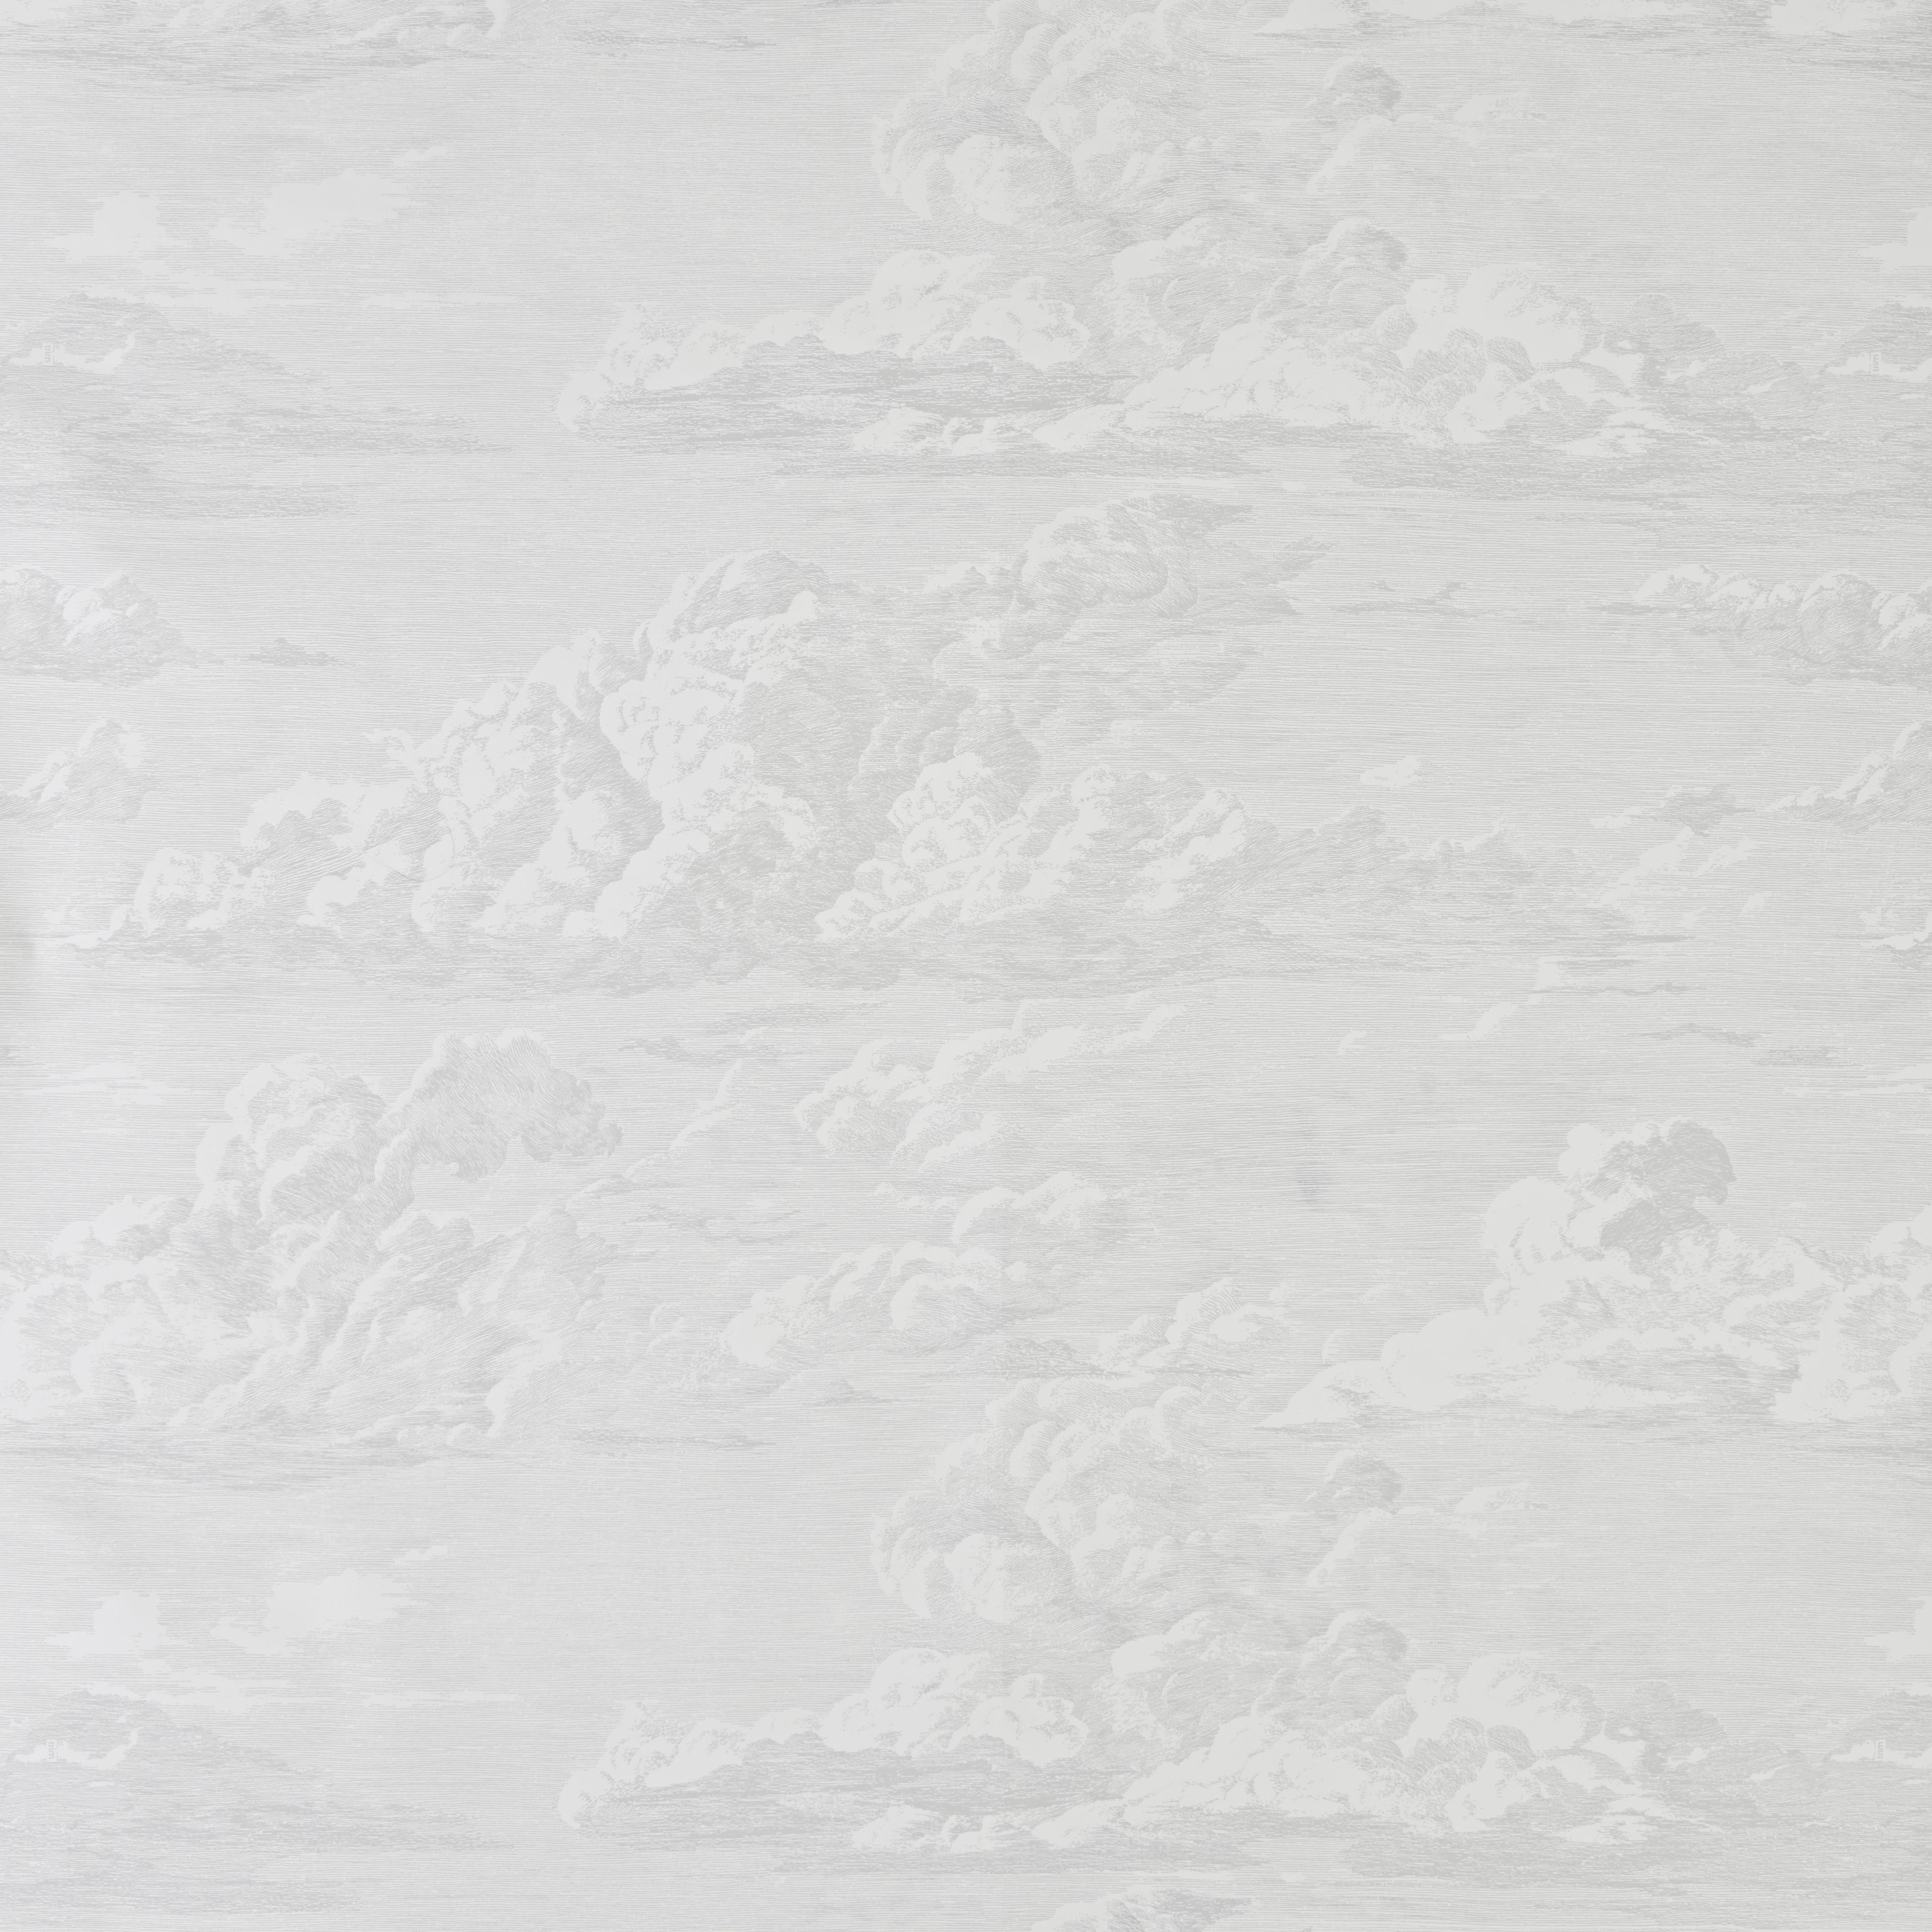 A sumptuous take on a design that debuted in the 1970s, this wide-width, screen-printed cloud pattern has unique depth and an ethereal, mural-like effect.

Since Schumacher was founded in 1889, our family-owned company has been synonymous with